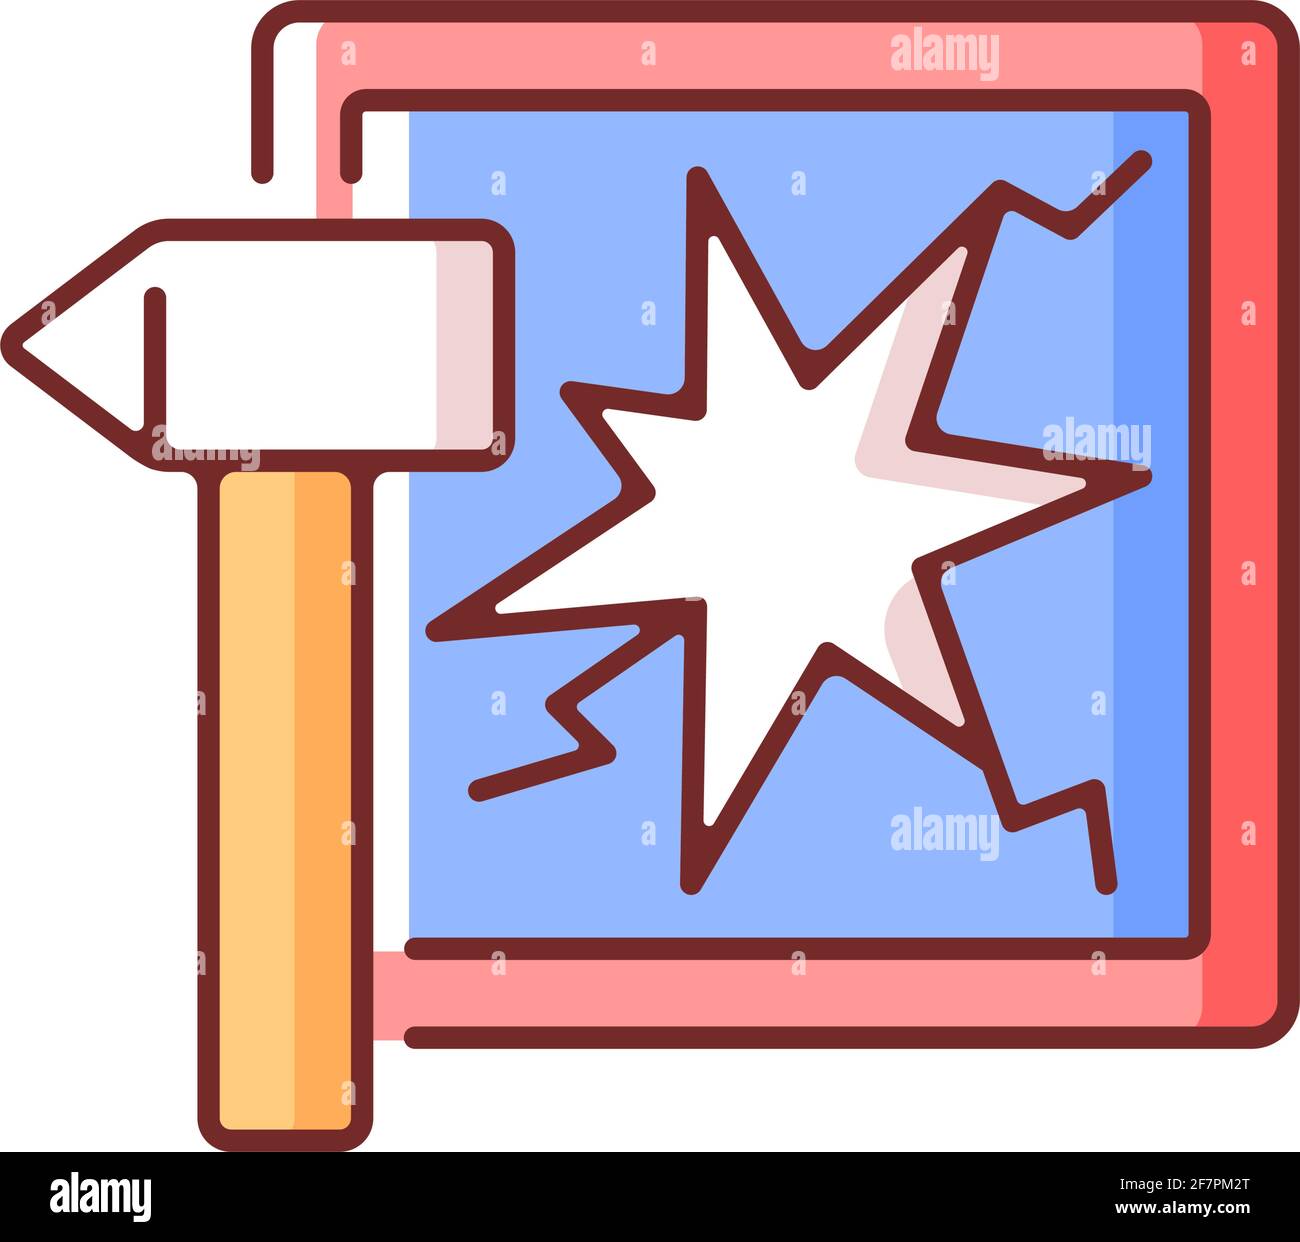 Break glass in case of emergency RGB color icon Stock Vector